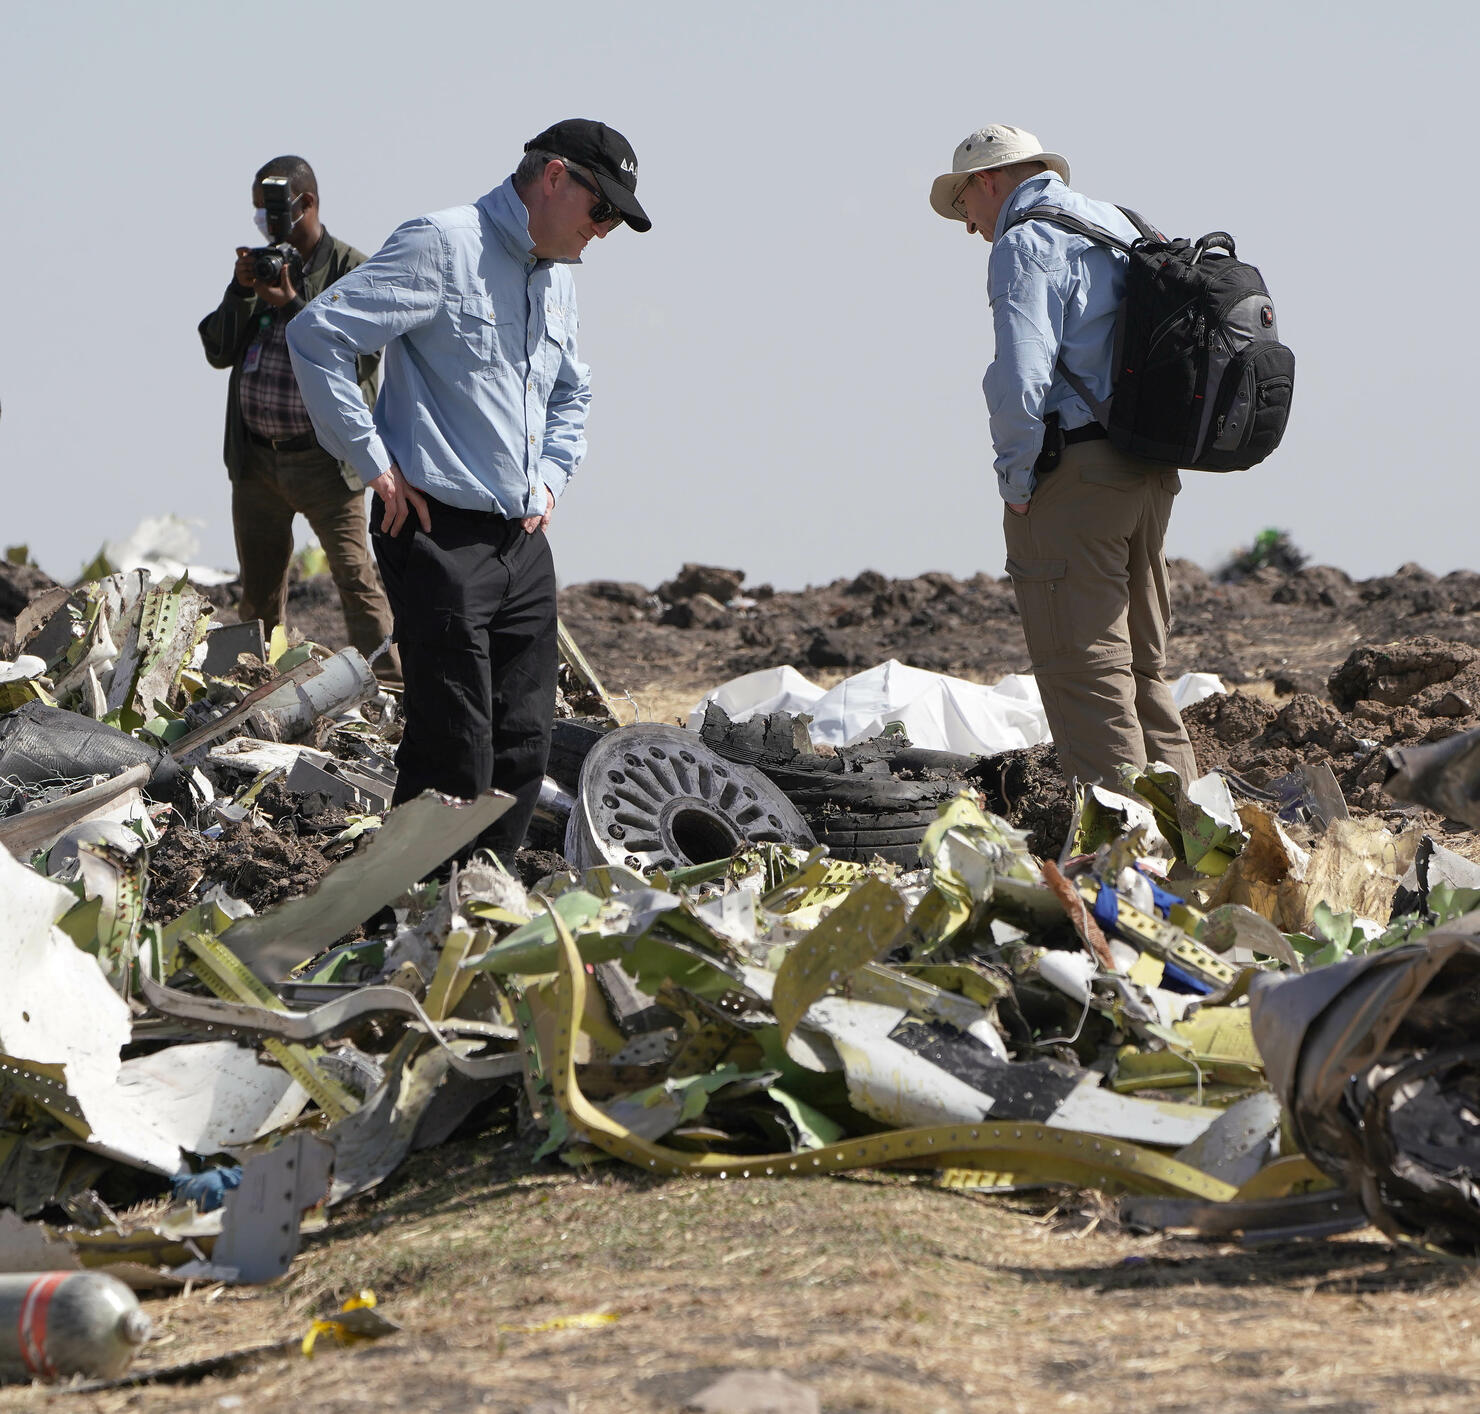 French authorities to examine black box data and lead investigation into Boeing 737 Max 8 crash